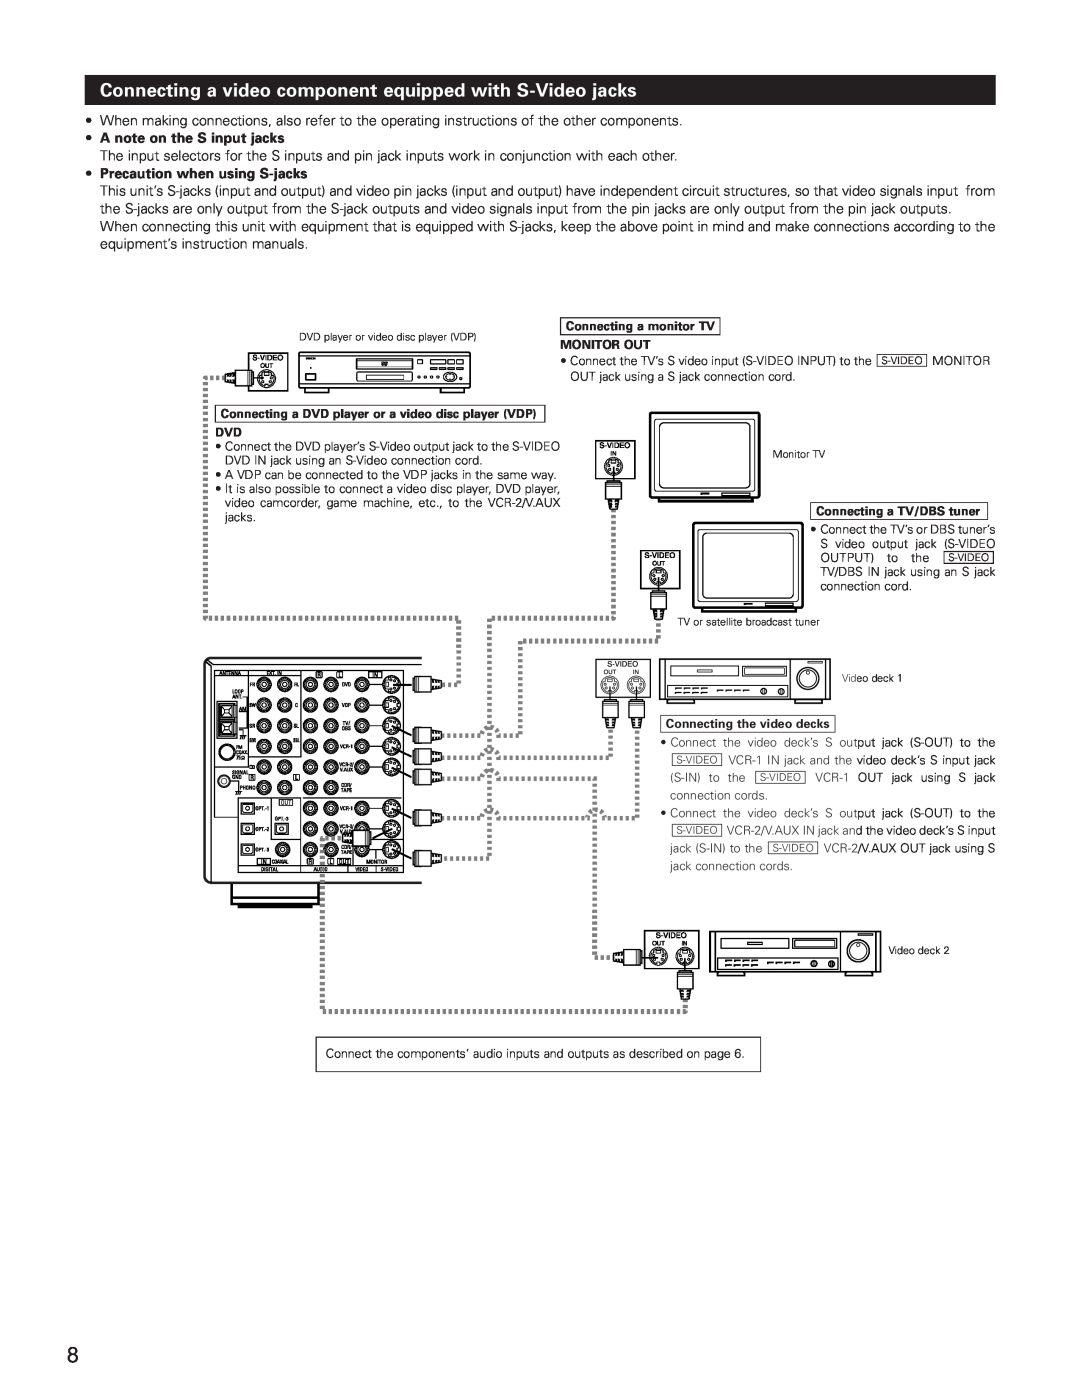 Denon AVR-3801 manual A note on the S input jacks, Precaution when using S-jacks, Connecting a monitor TV MONITOR OUT 